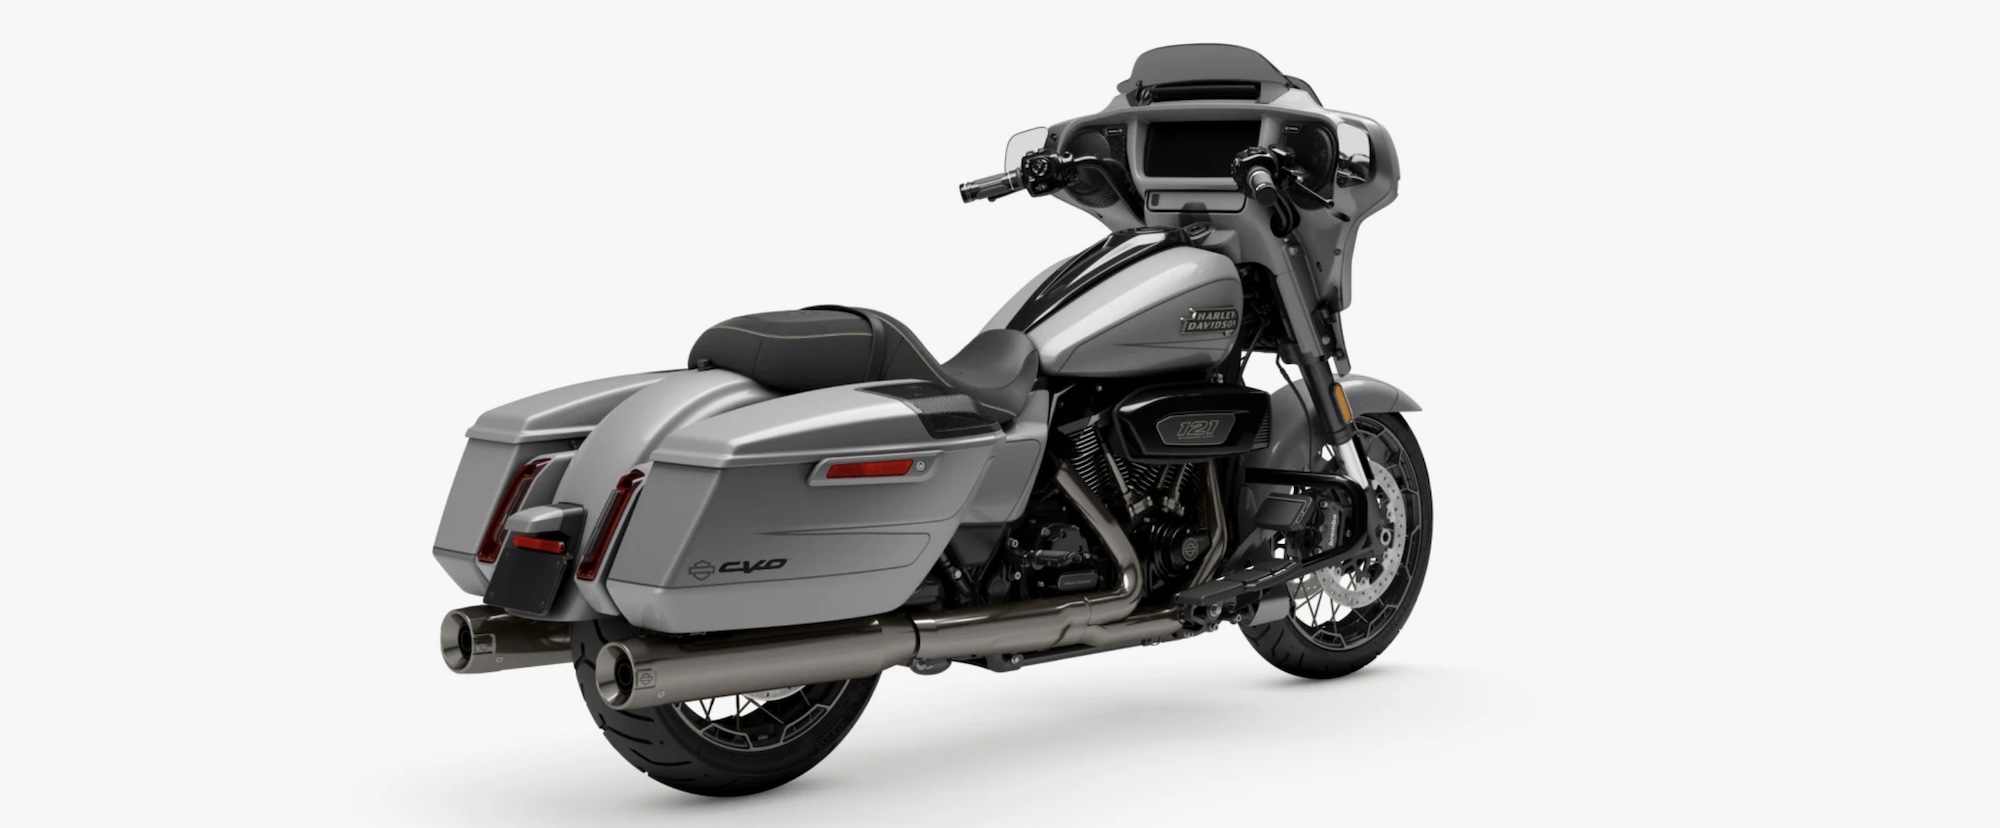 A back quarter view of Harley-Davidson’s 2023 Street Glide CVO motorcycle.